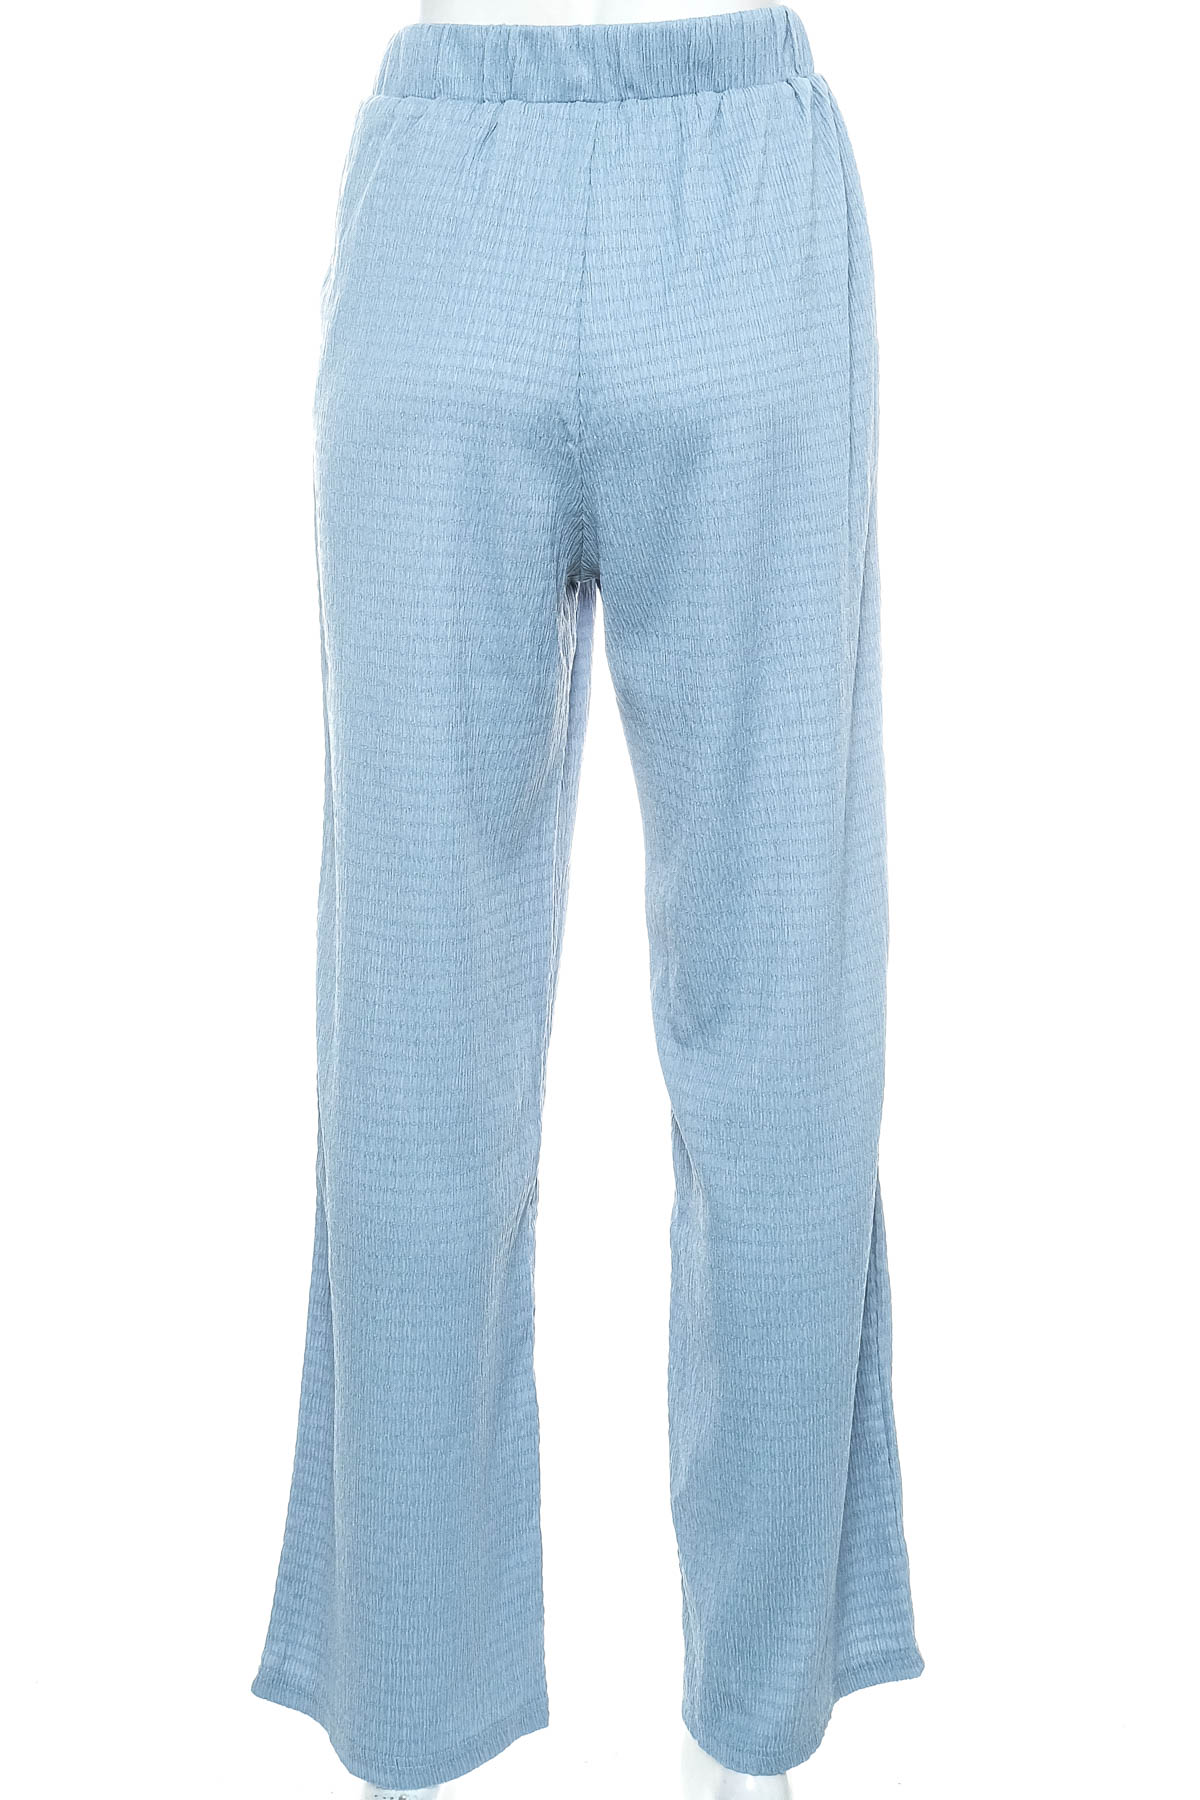 Women's trousers - CIDER - 1